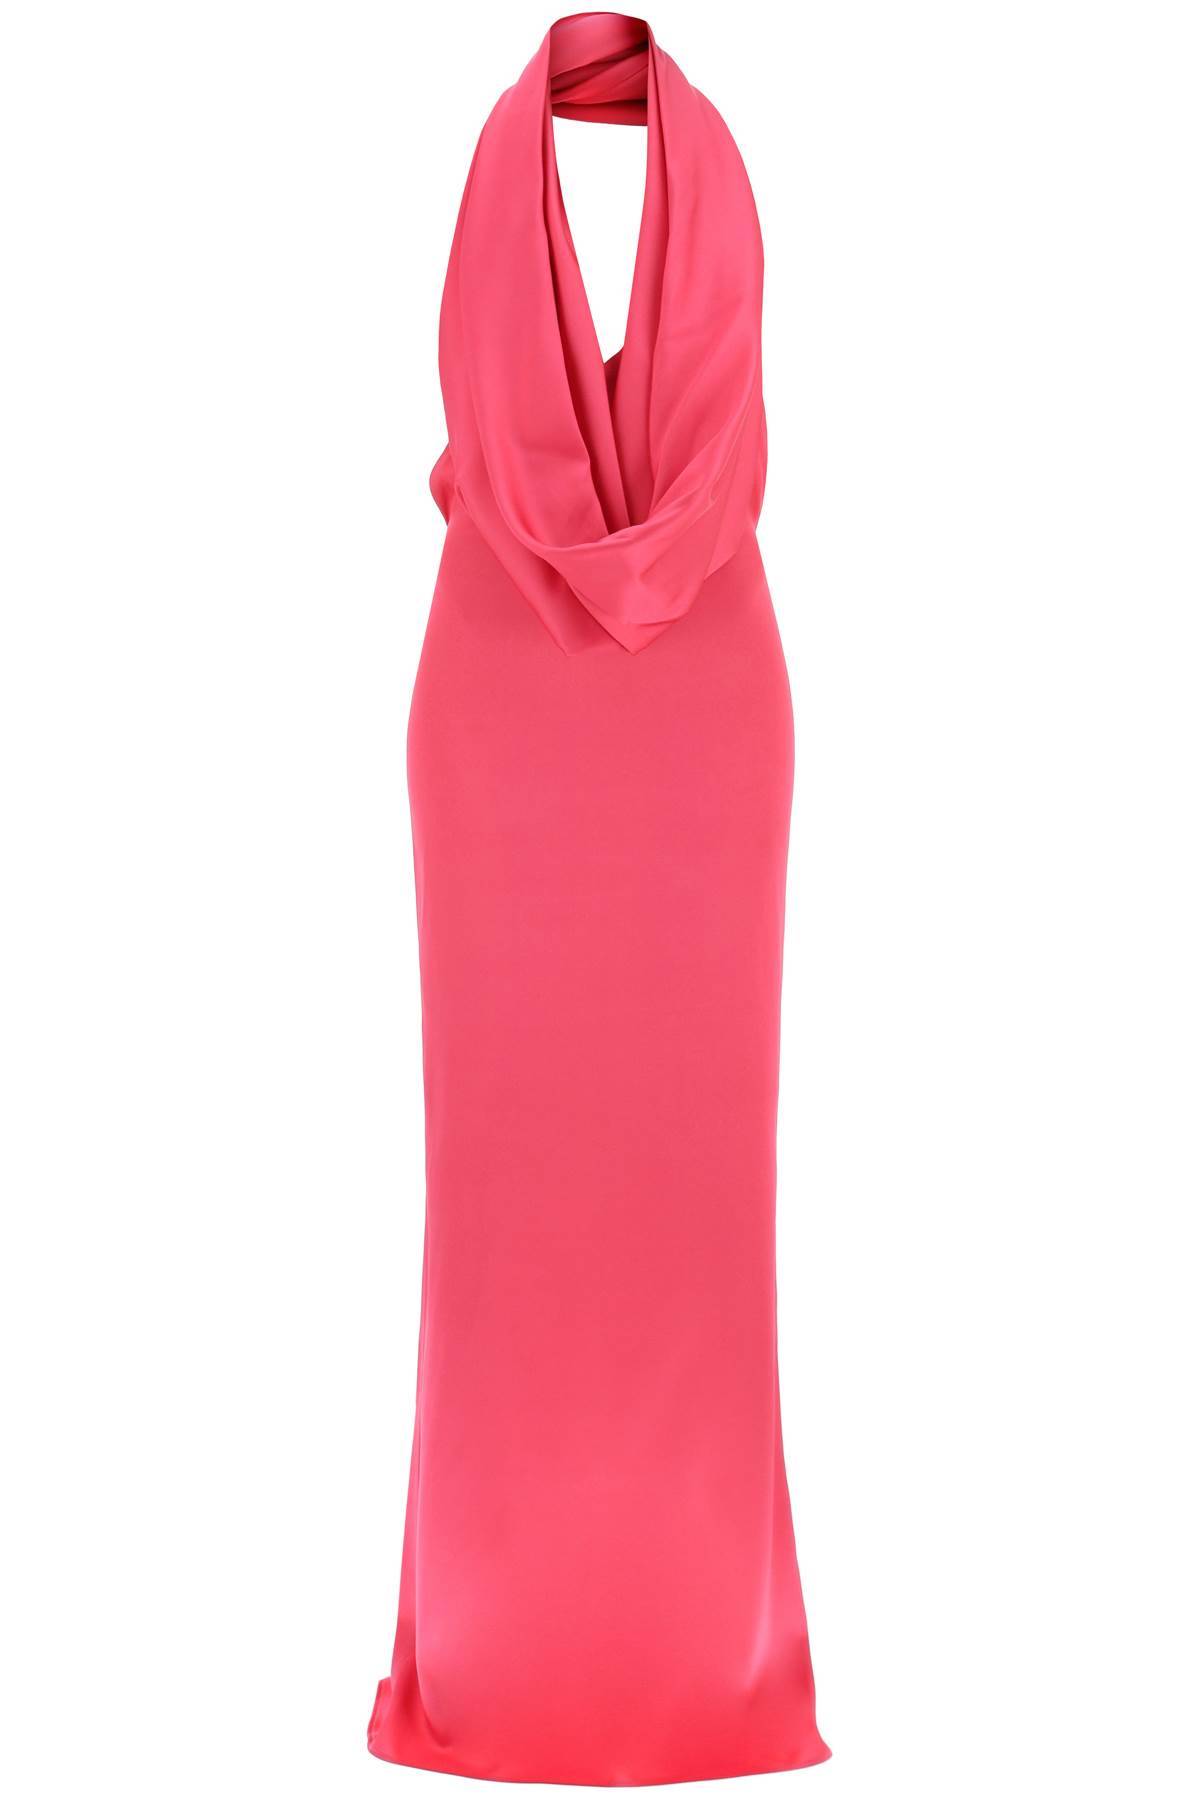 GIUSEPPE DI MORABITO GIUSEPPE DI MORABITO maxi gown with built-in hood